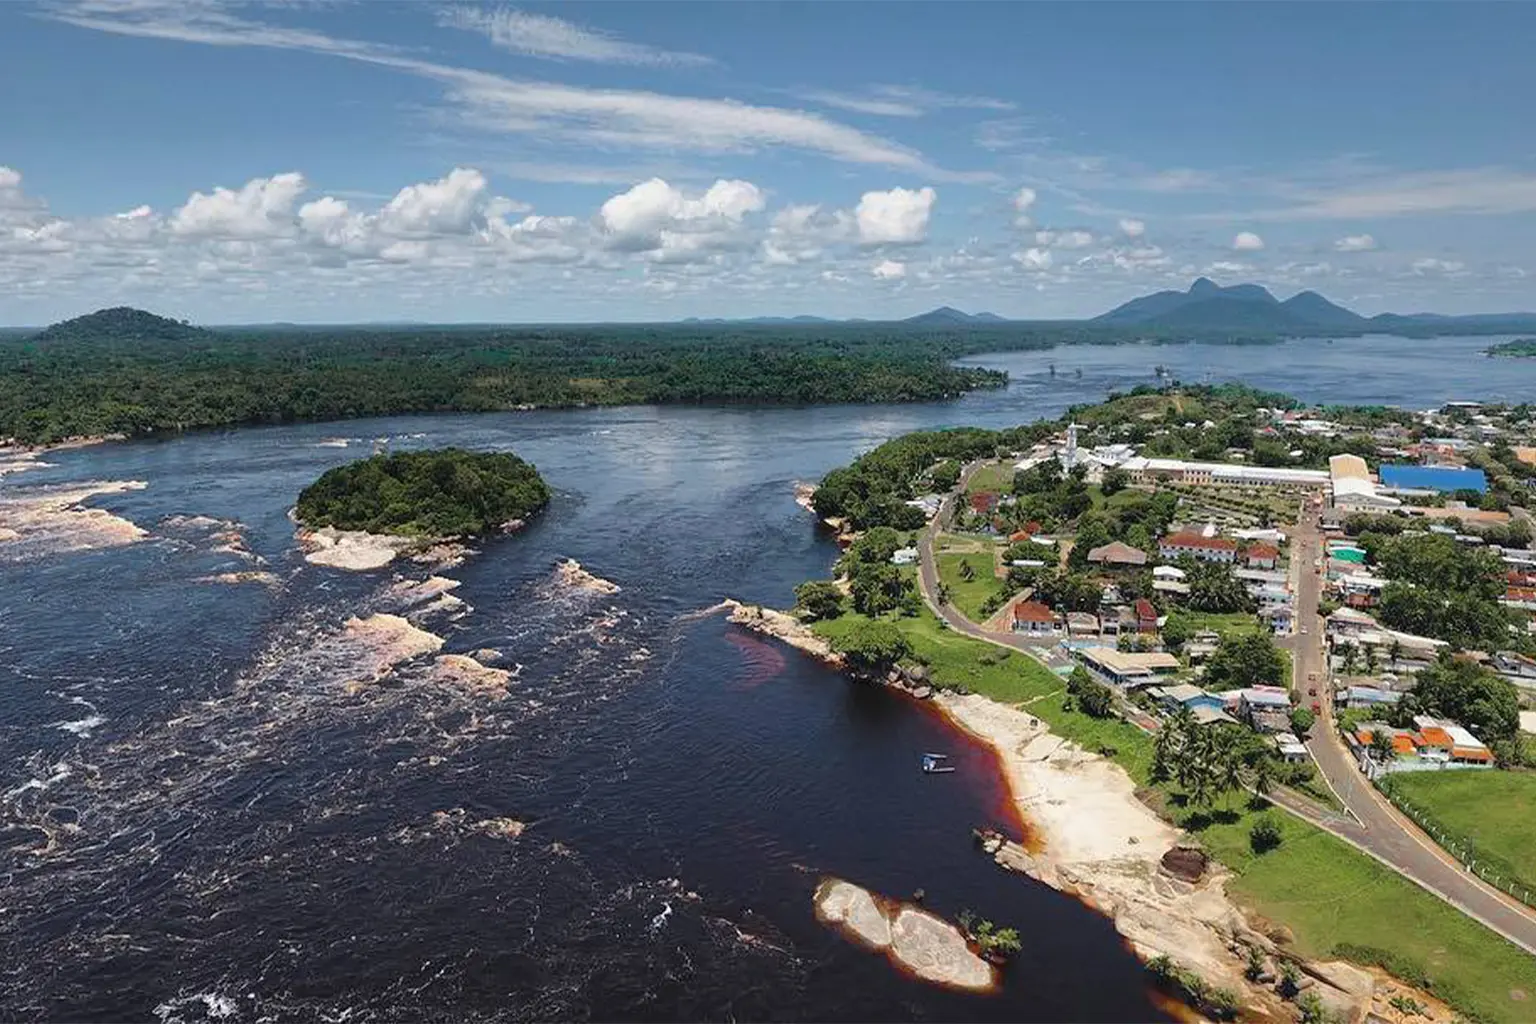 Overhead photo of the Rio Negro and the town of Sao Gabriel da Cachoeira with mountains in the distance.